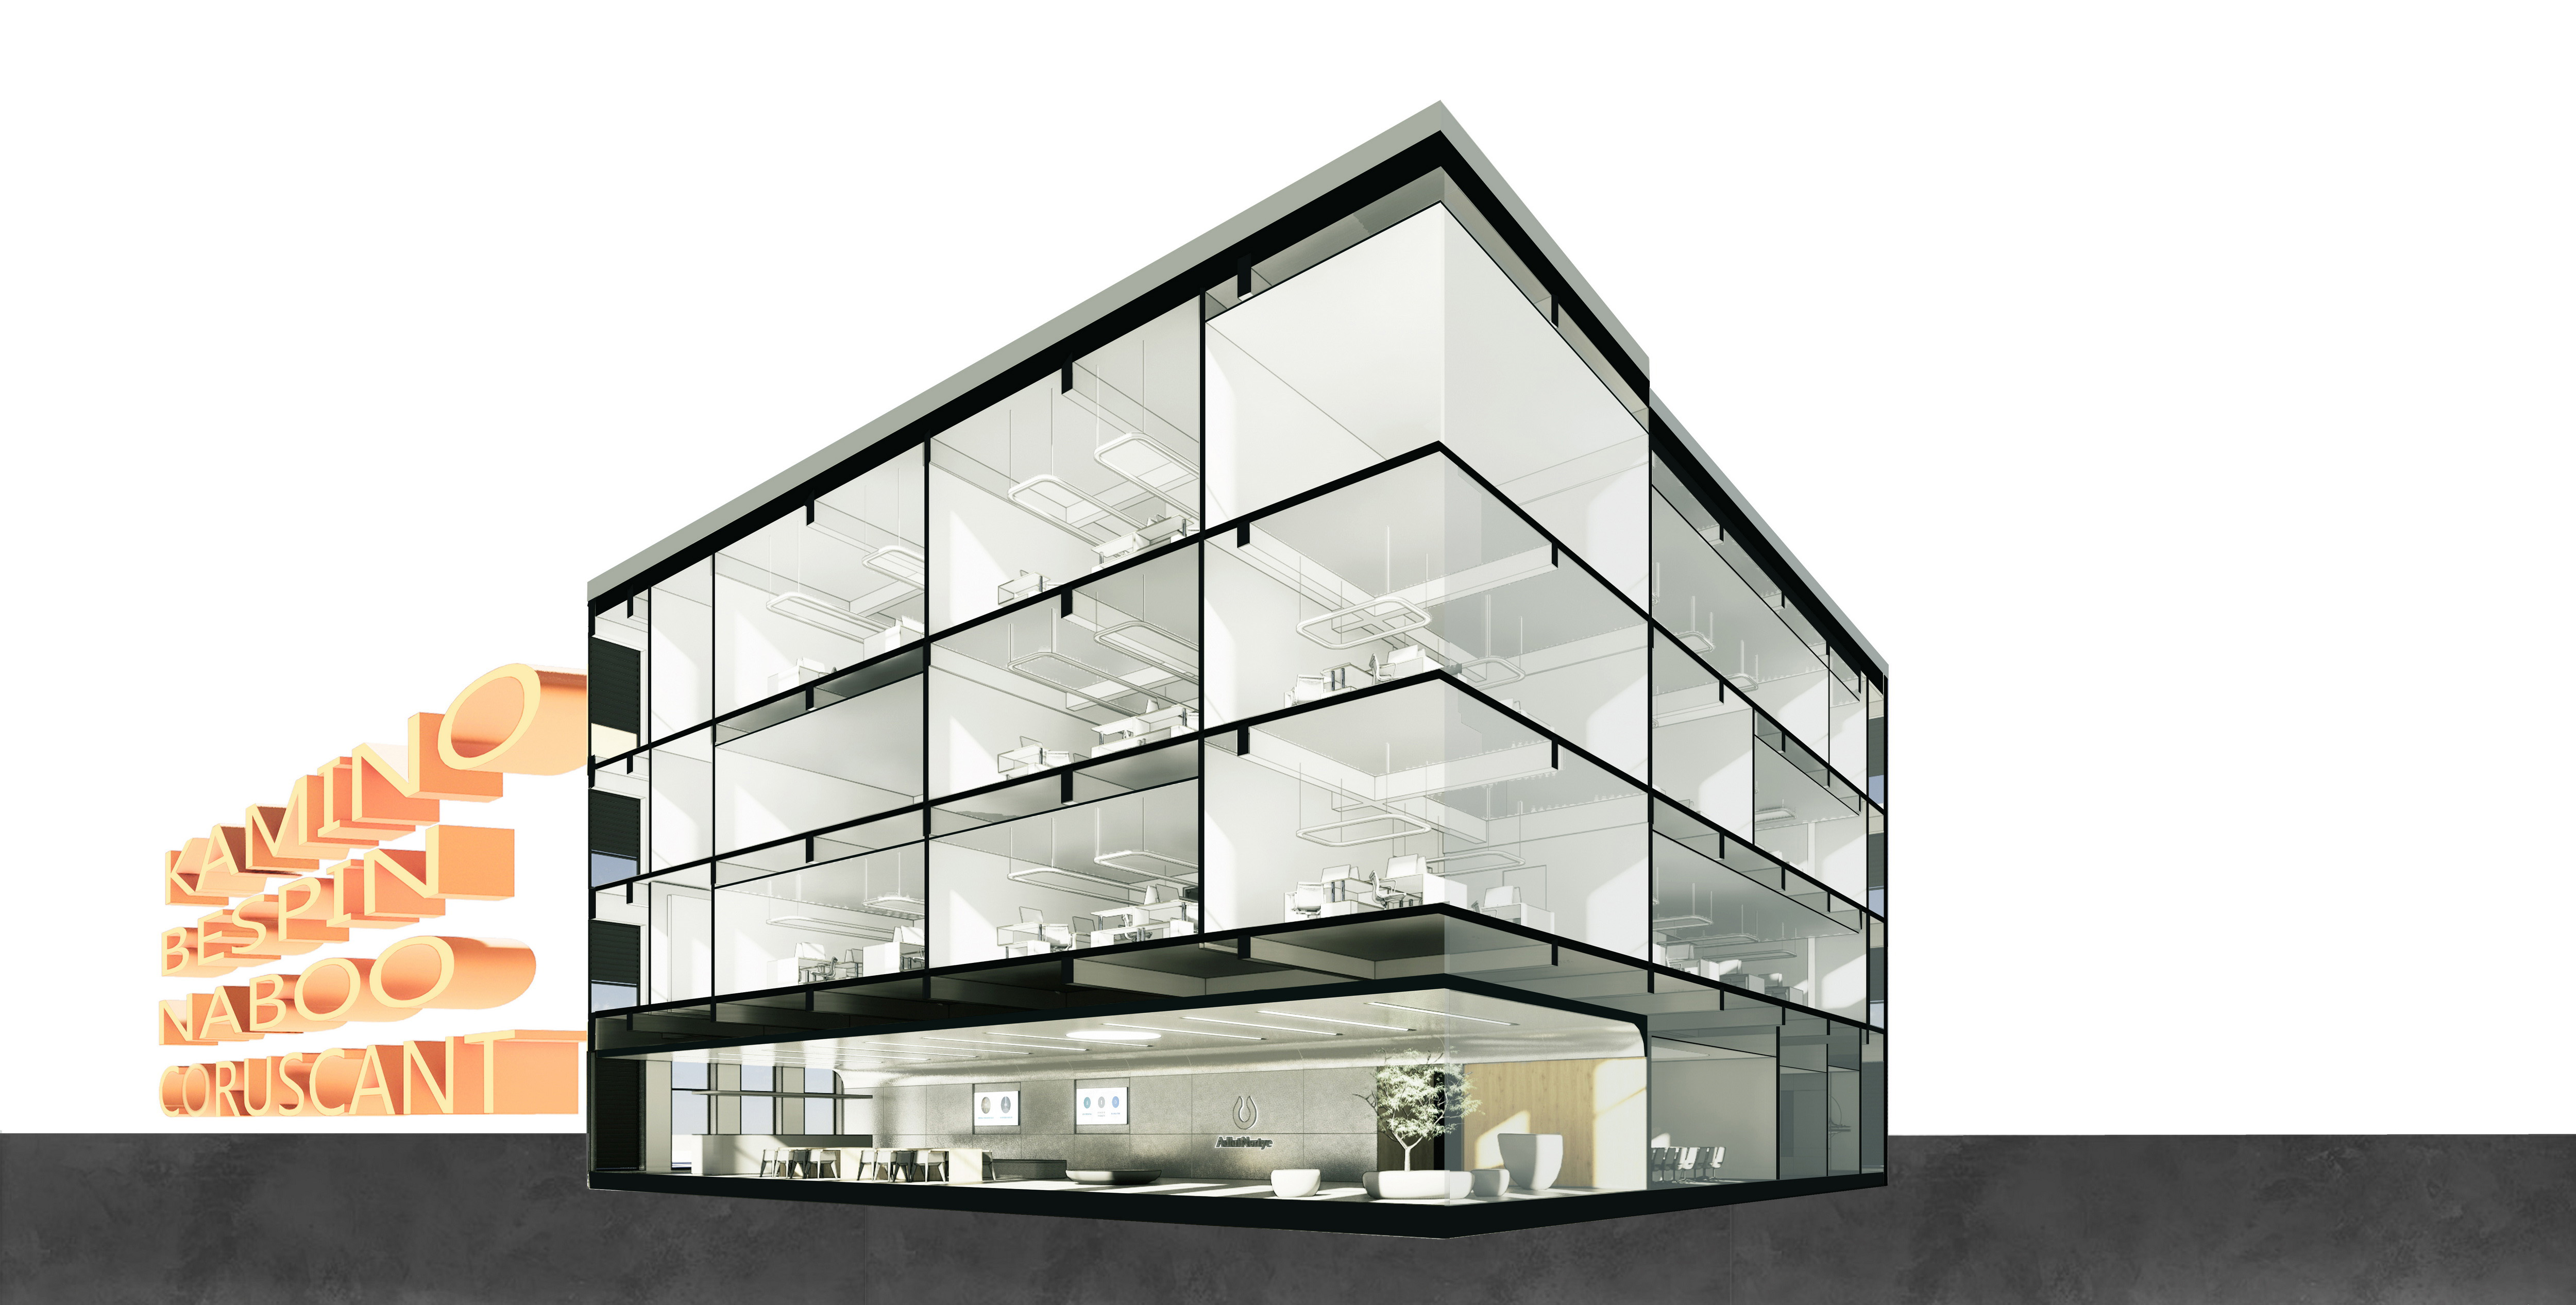 m2 _sectional view of the building 6_调整大小.jpg